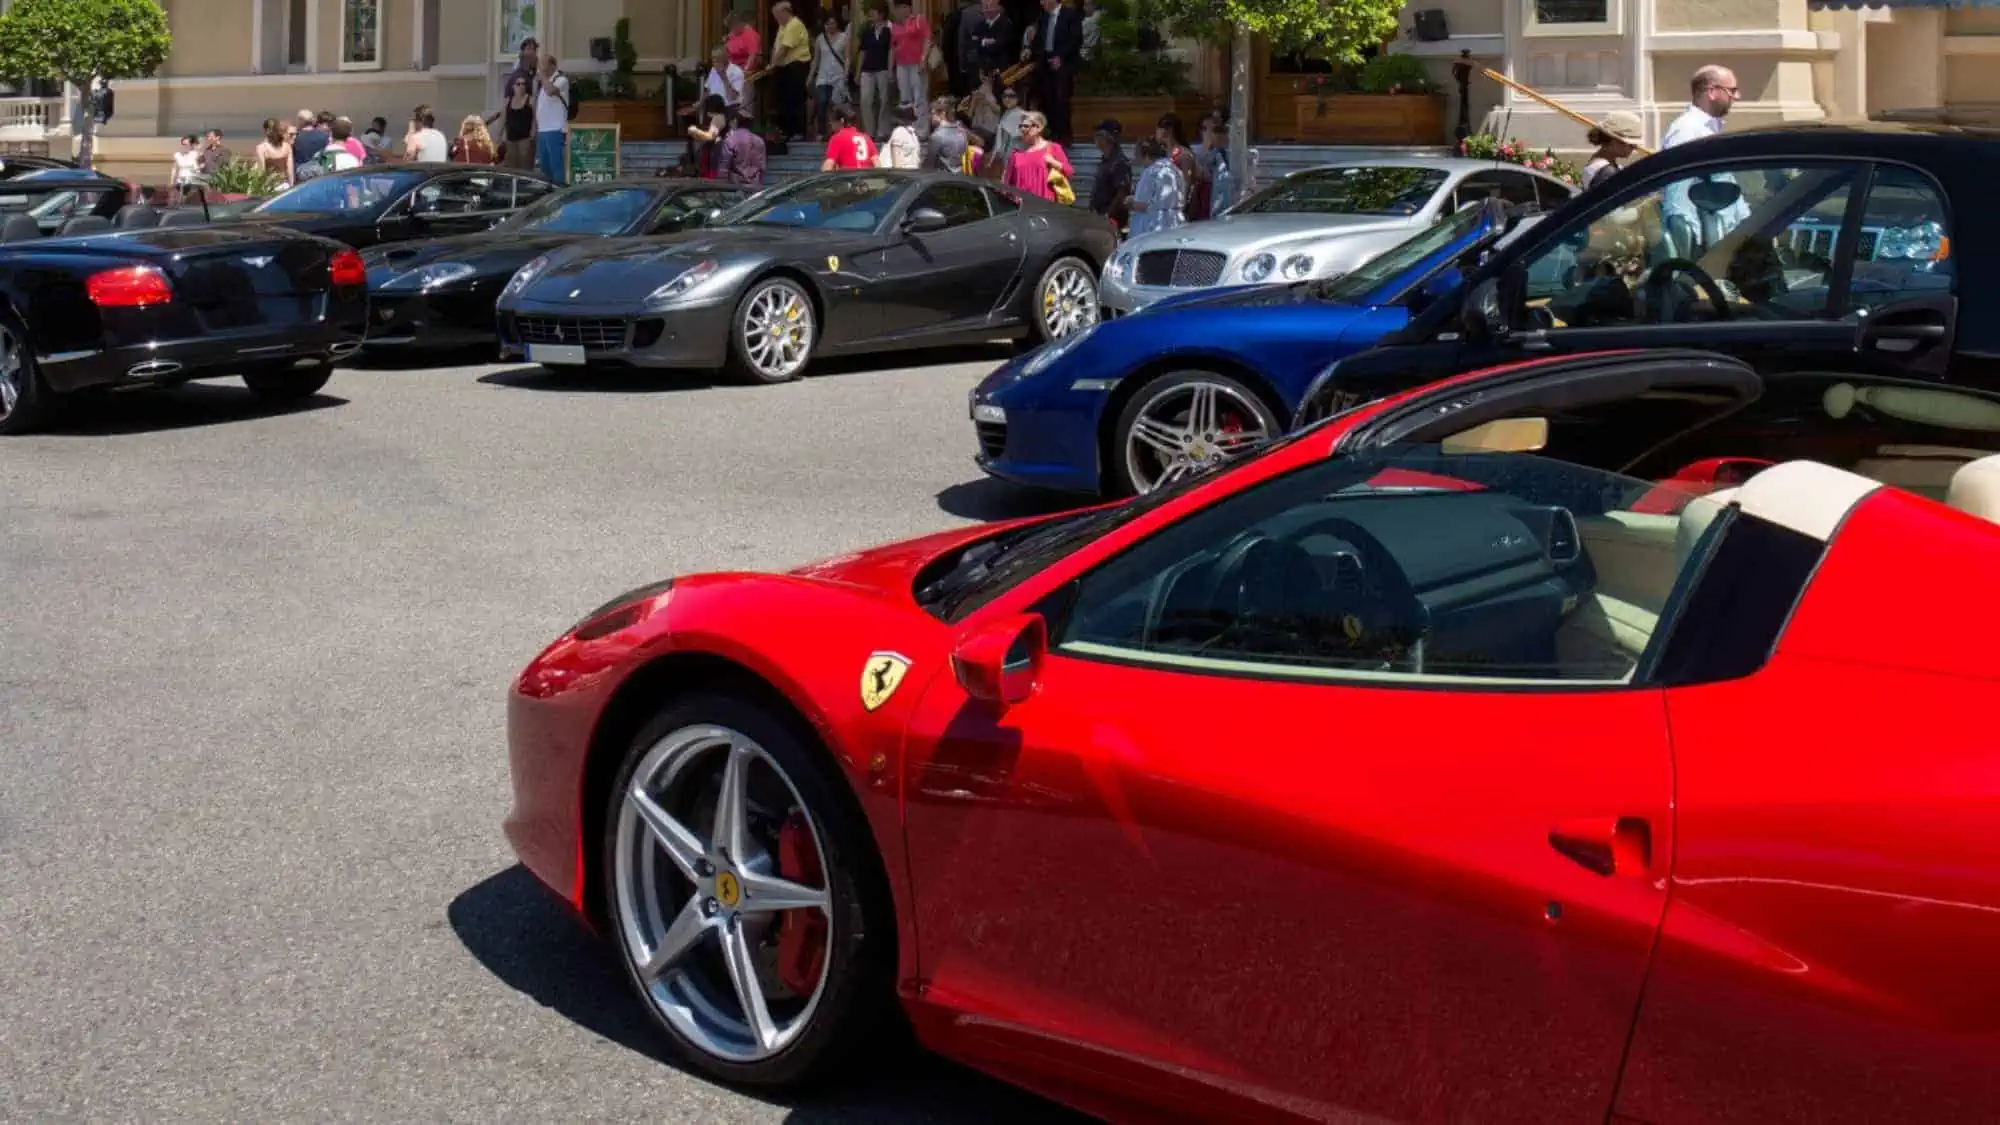 Expensive cars including Ferrari, Rolls Royce, and Bentley on display to the public